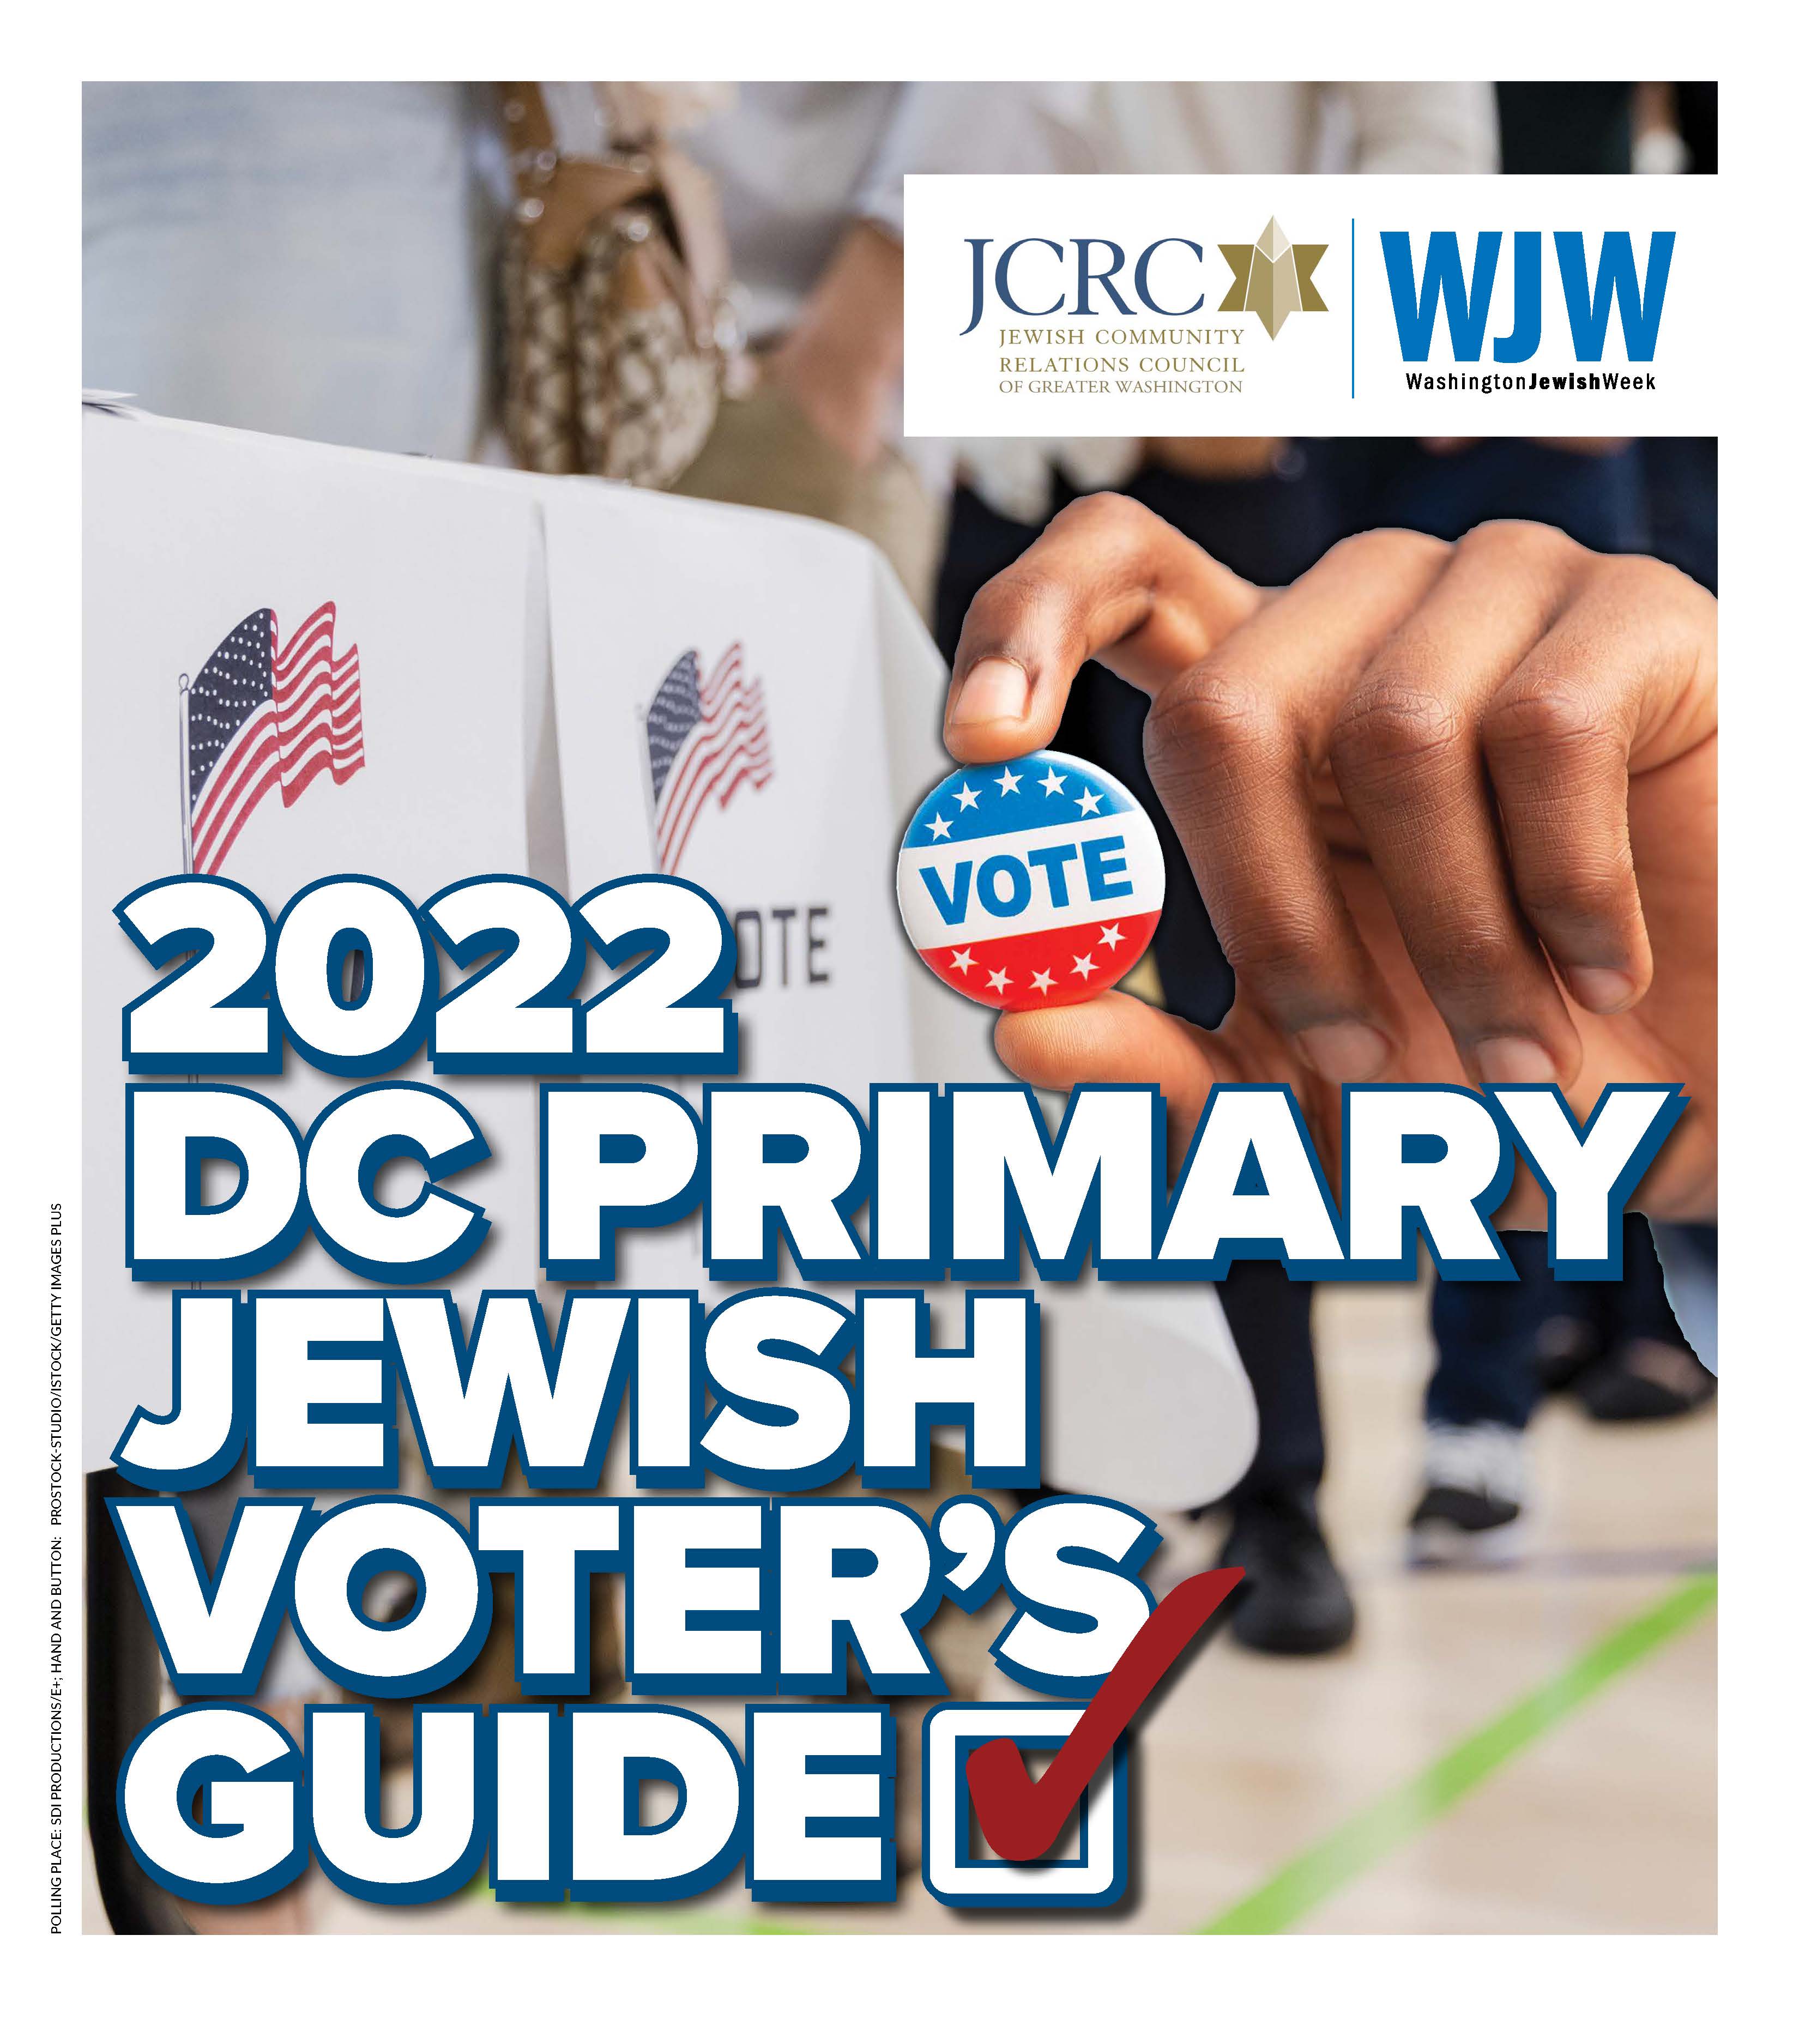 JCRC & WJW 2022 DC Primary Jewish Voter's Guide